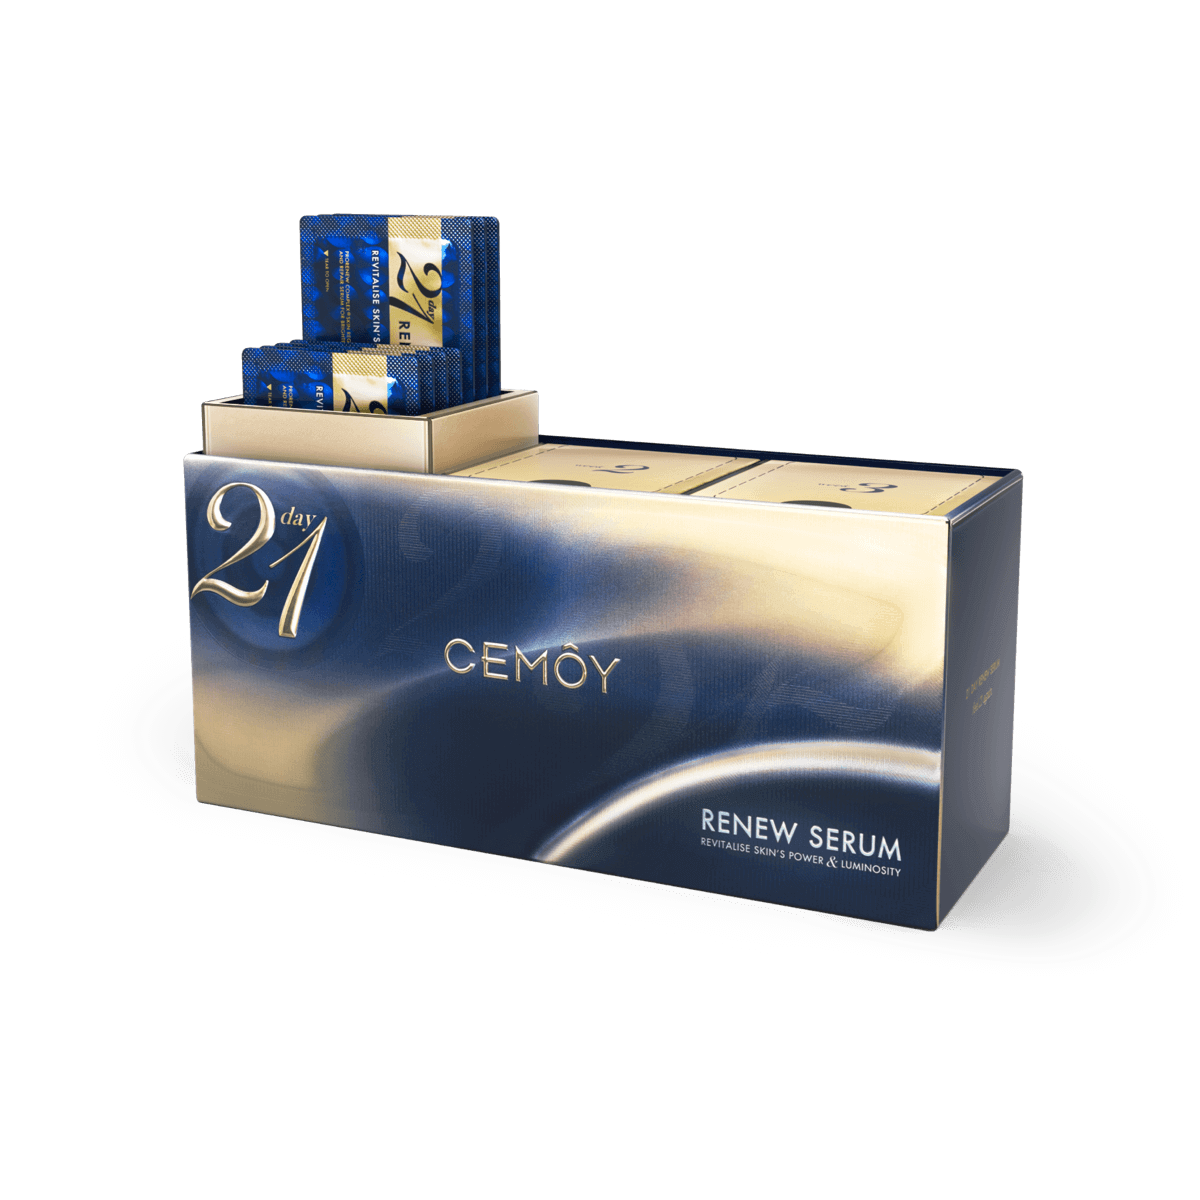 //cemoy.com/uploads/2022/10/CEMOY_PRODUCT_21-Day-Renew-Serum.png